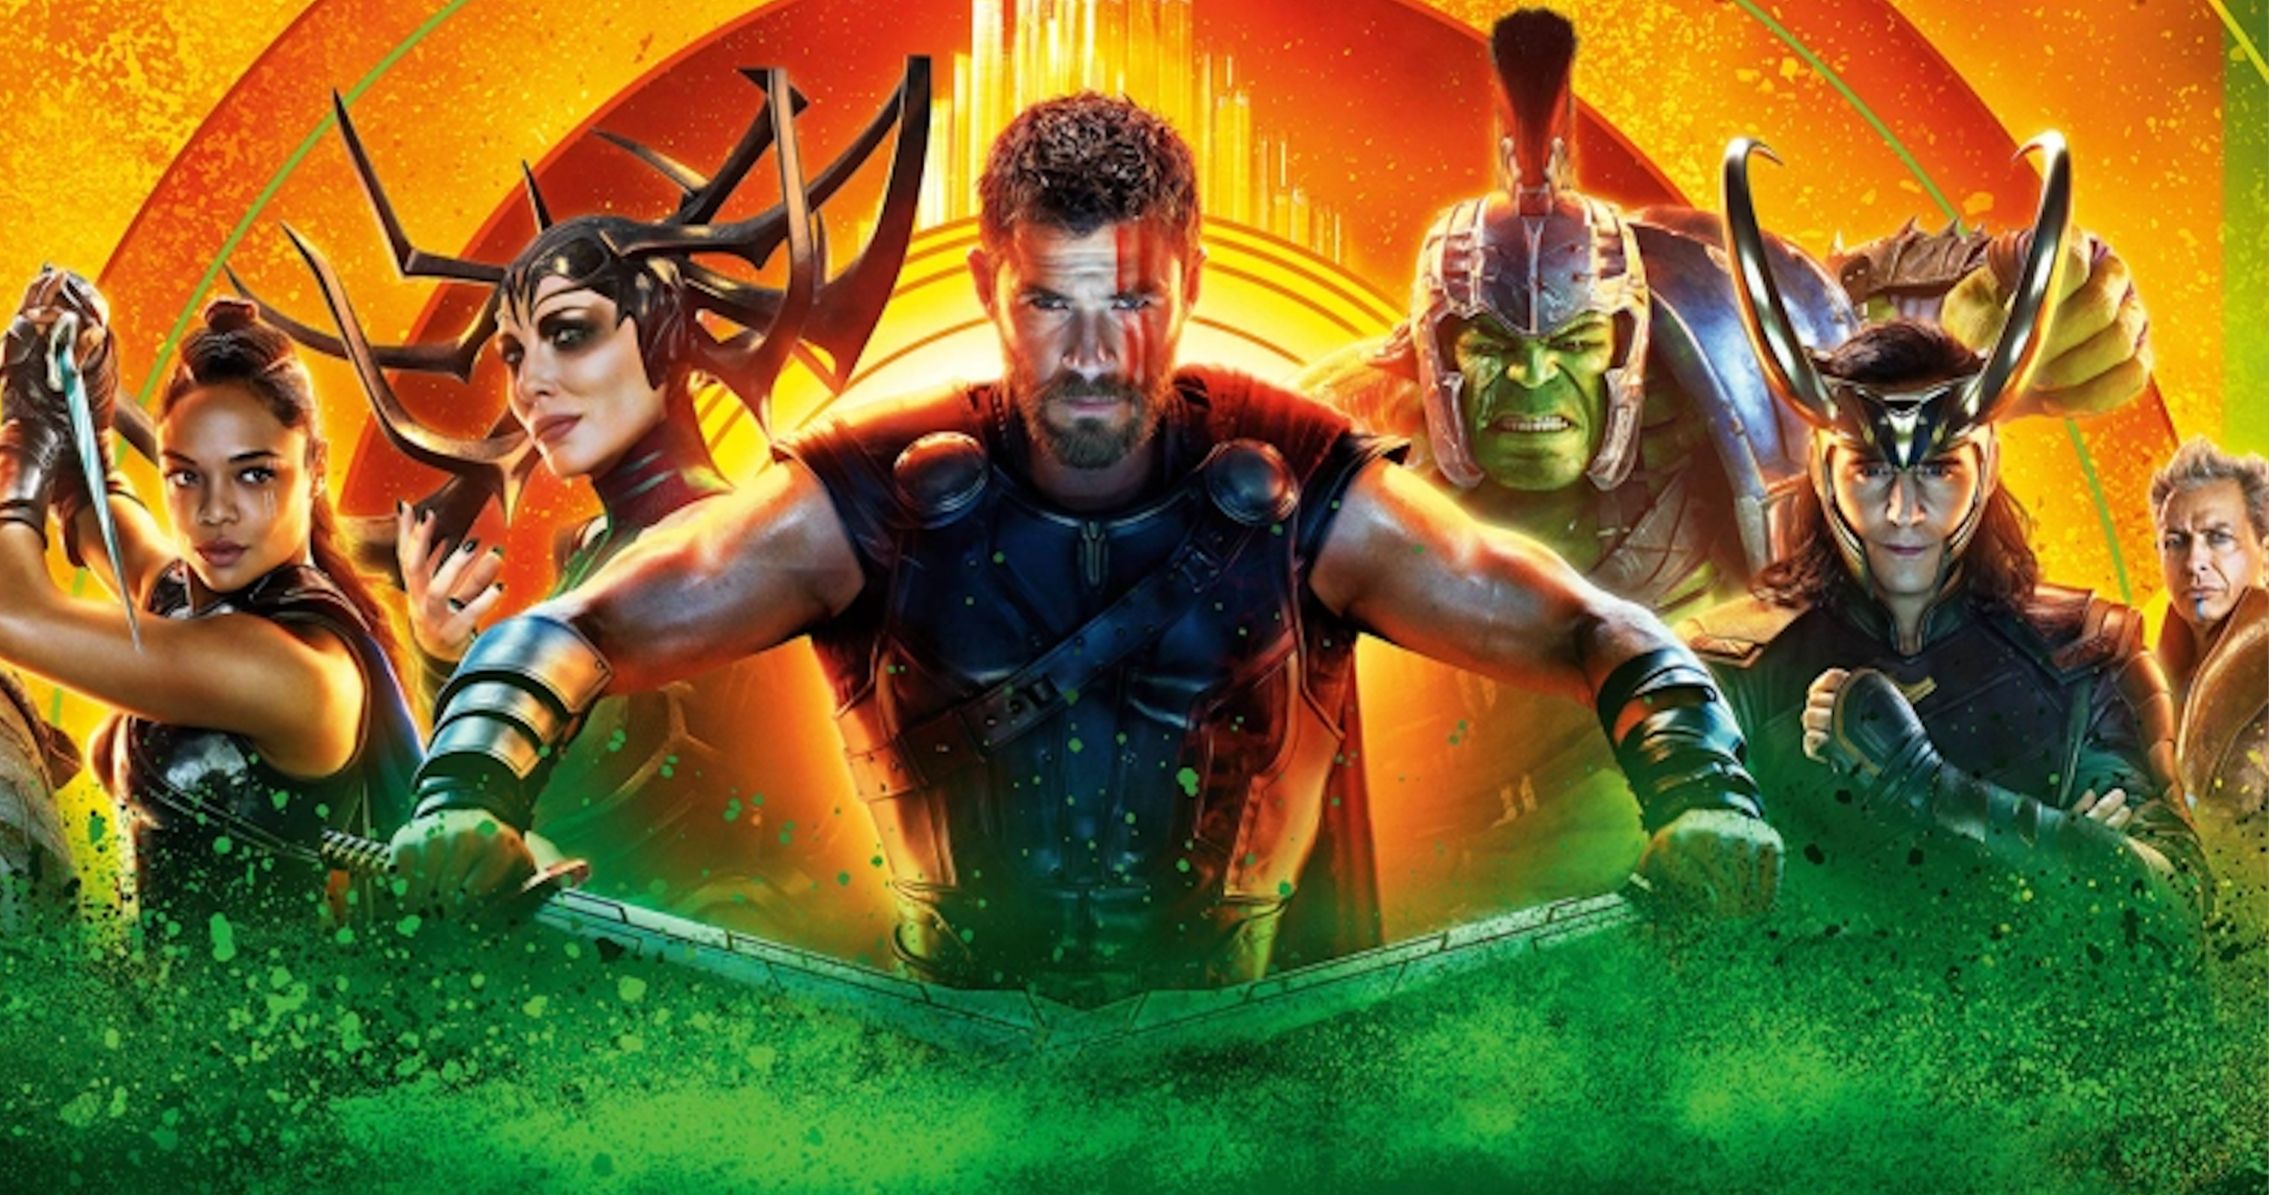 Wonder Woman 1984 Director Calls Thor: Ragnarok One of the Best Marvel Movies Ever